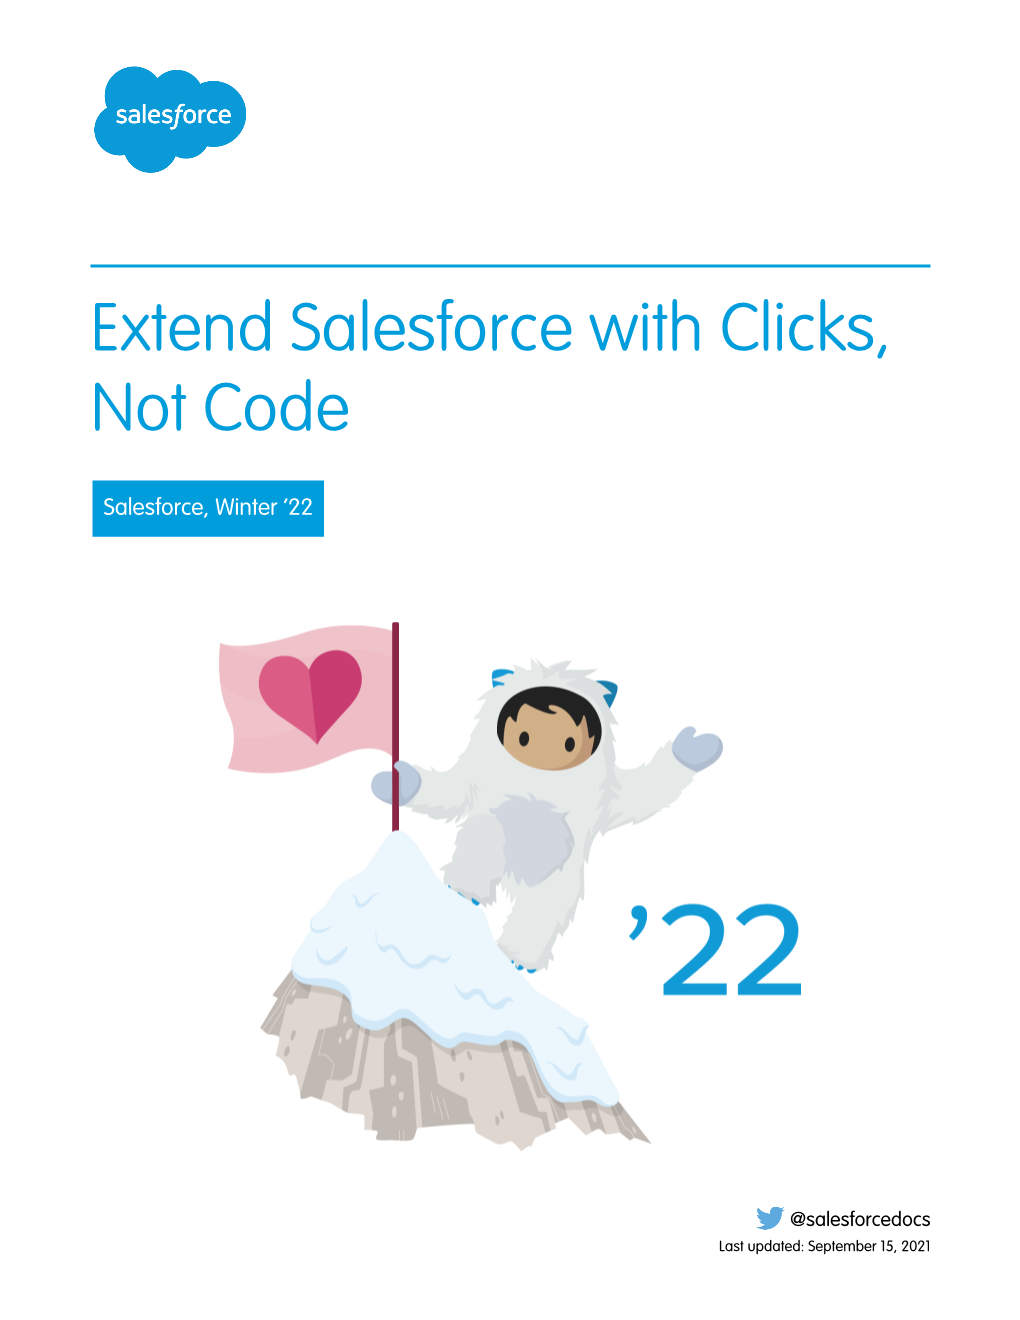 Extend Salesforce with Clicks, Not Code